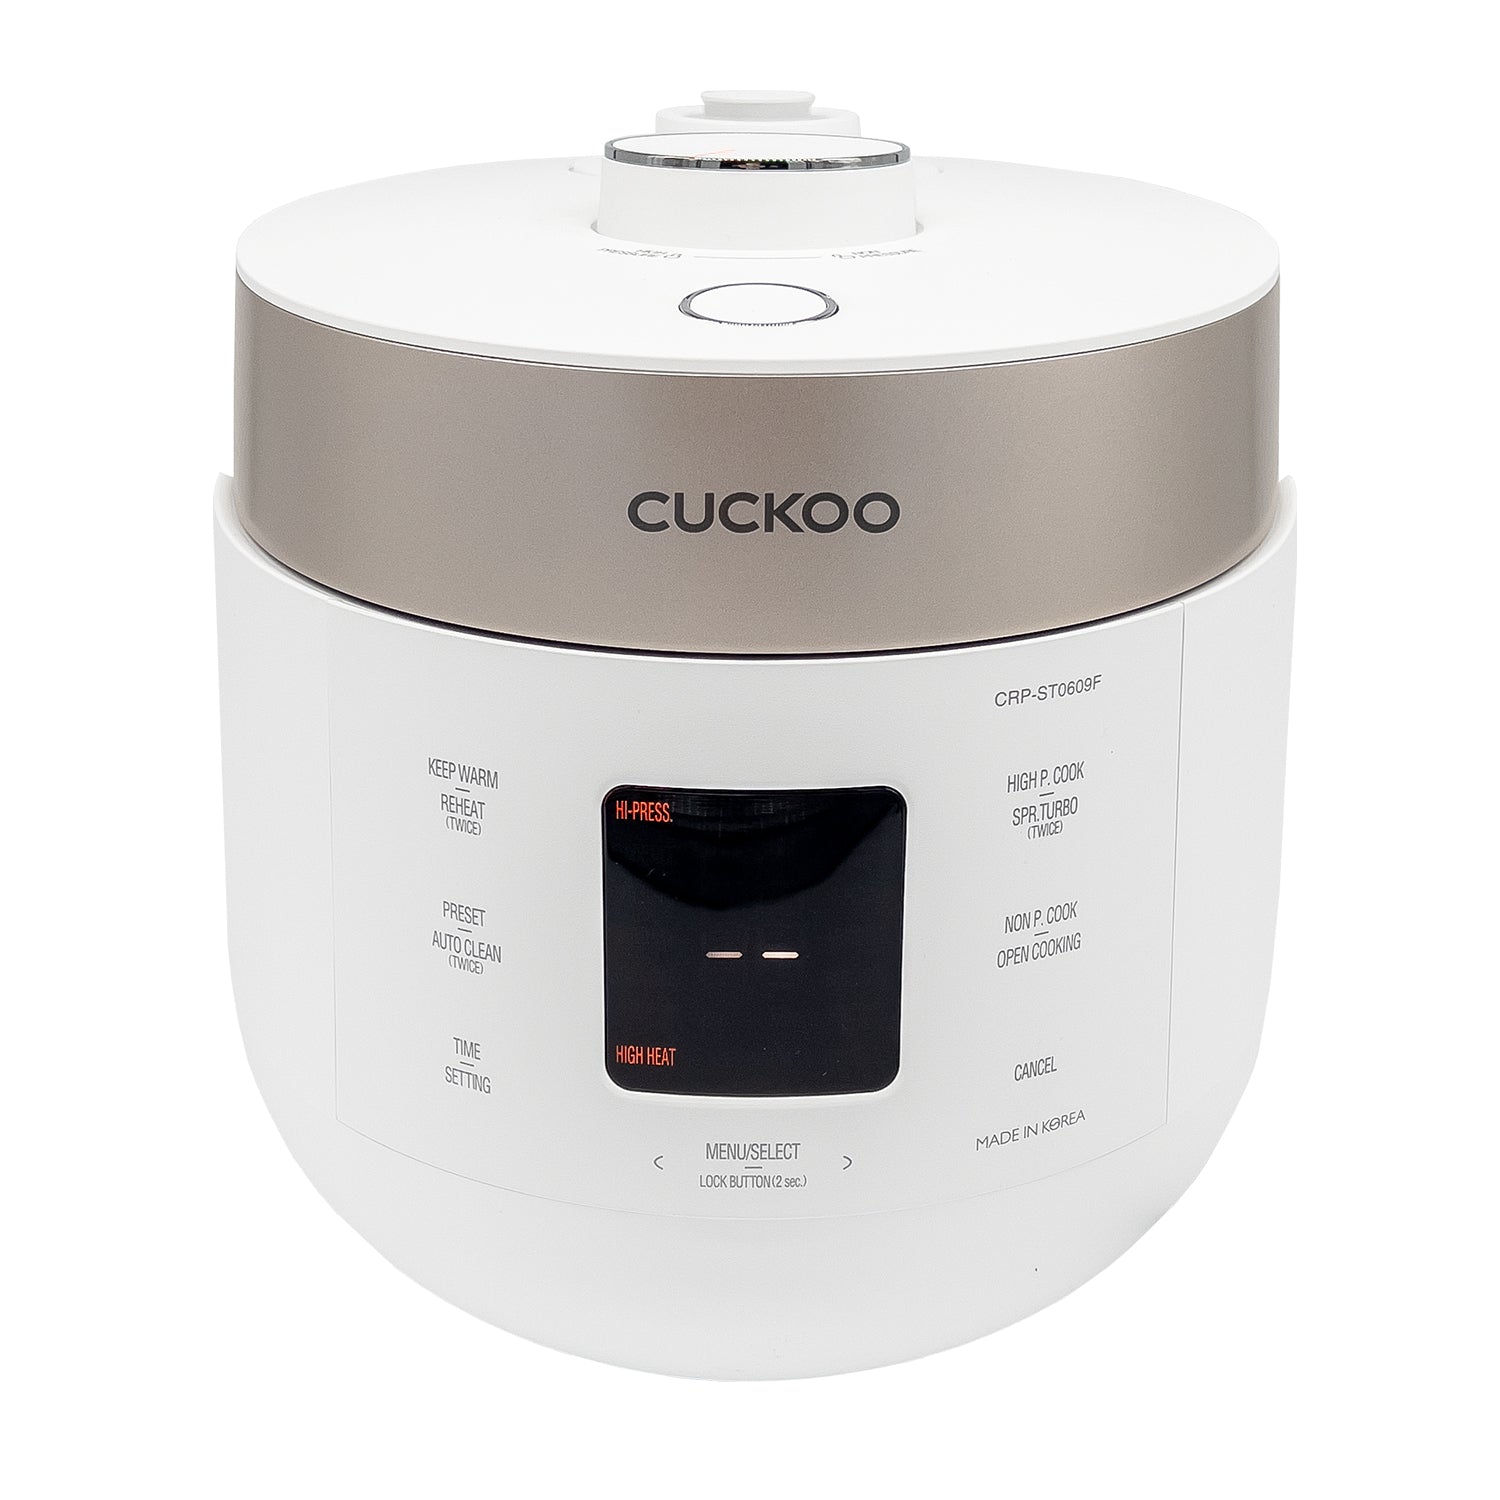 CUCKOO RICE COOKER - SET VOICE GUIDE TUTORIAL 